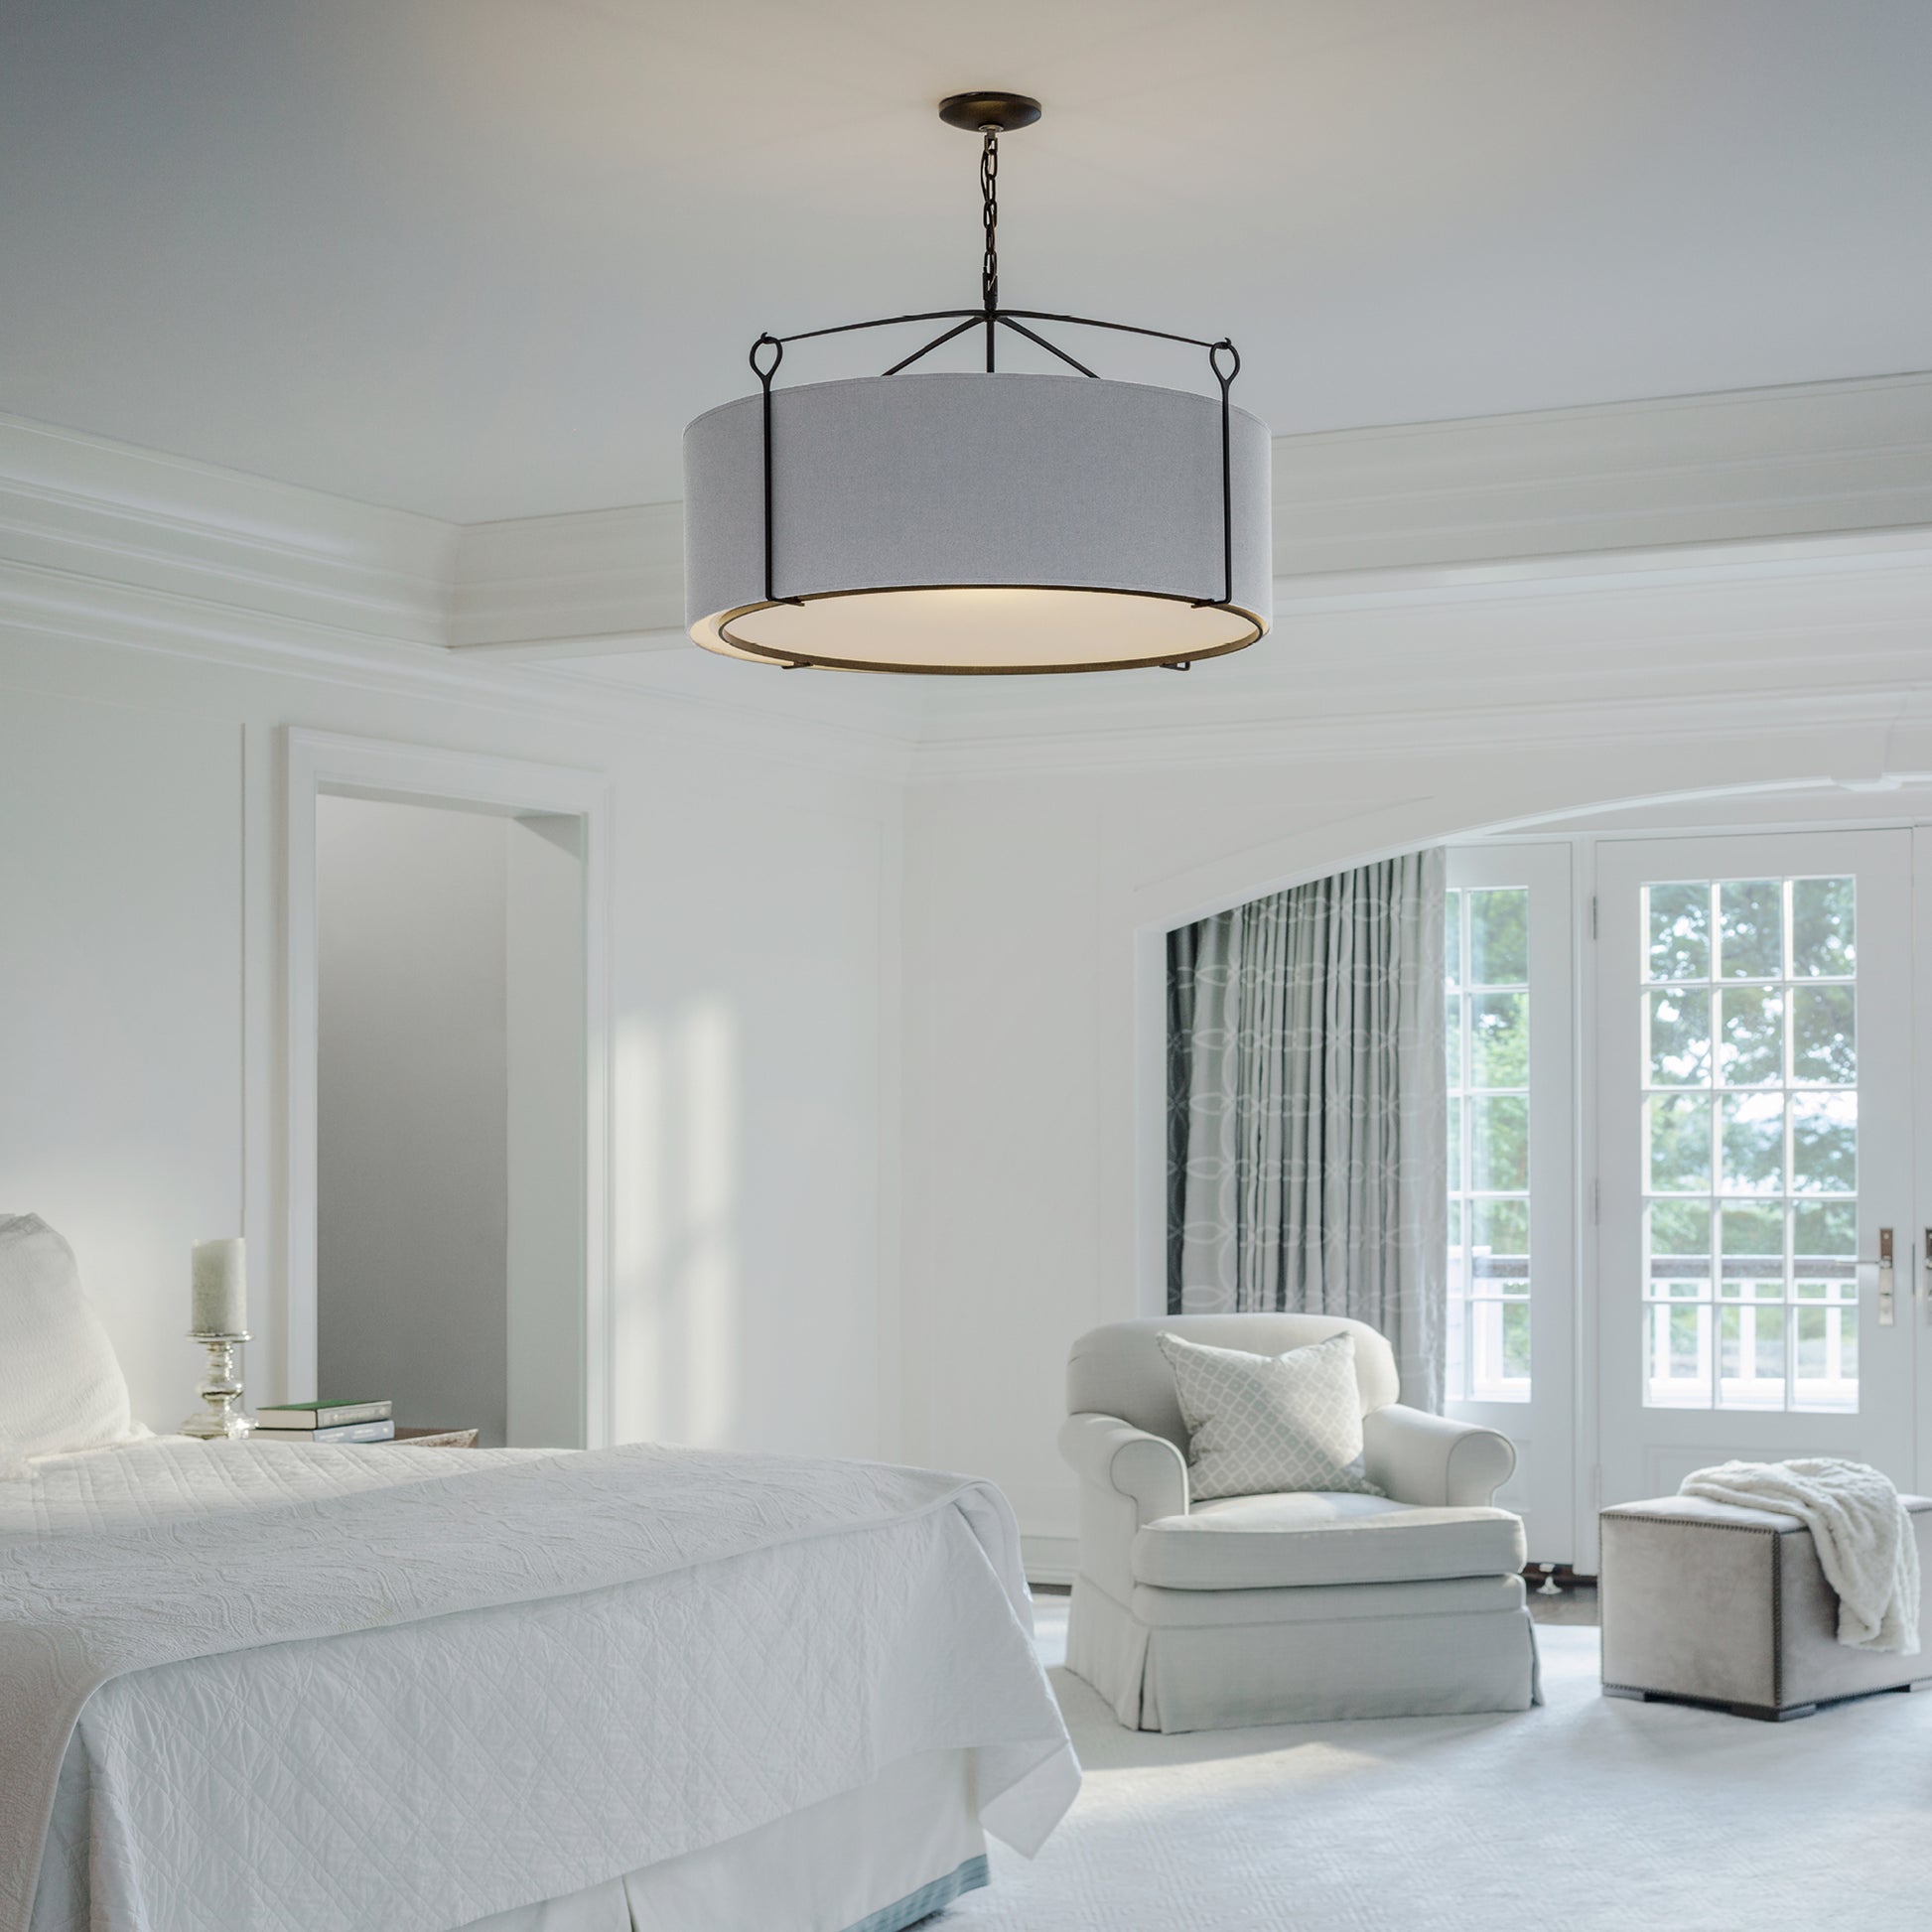 An elegant bedroom featuring white walls and linens, with a large window, an upholstered chair, a side table, and a Hubbardton Forge Bow Large Pendant ceiling lamp. The room is designed with a lavish yet